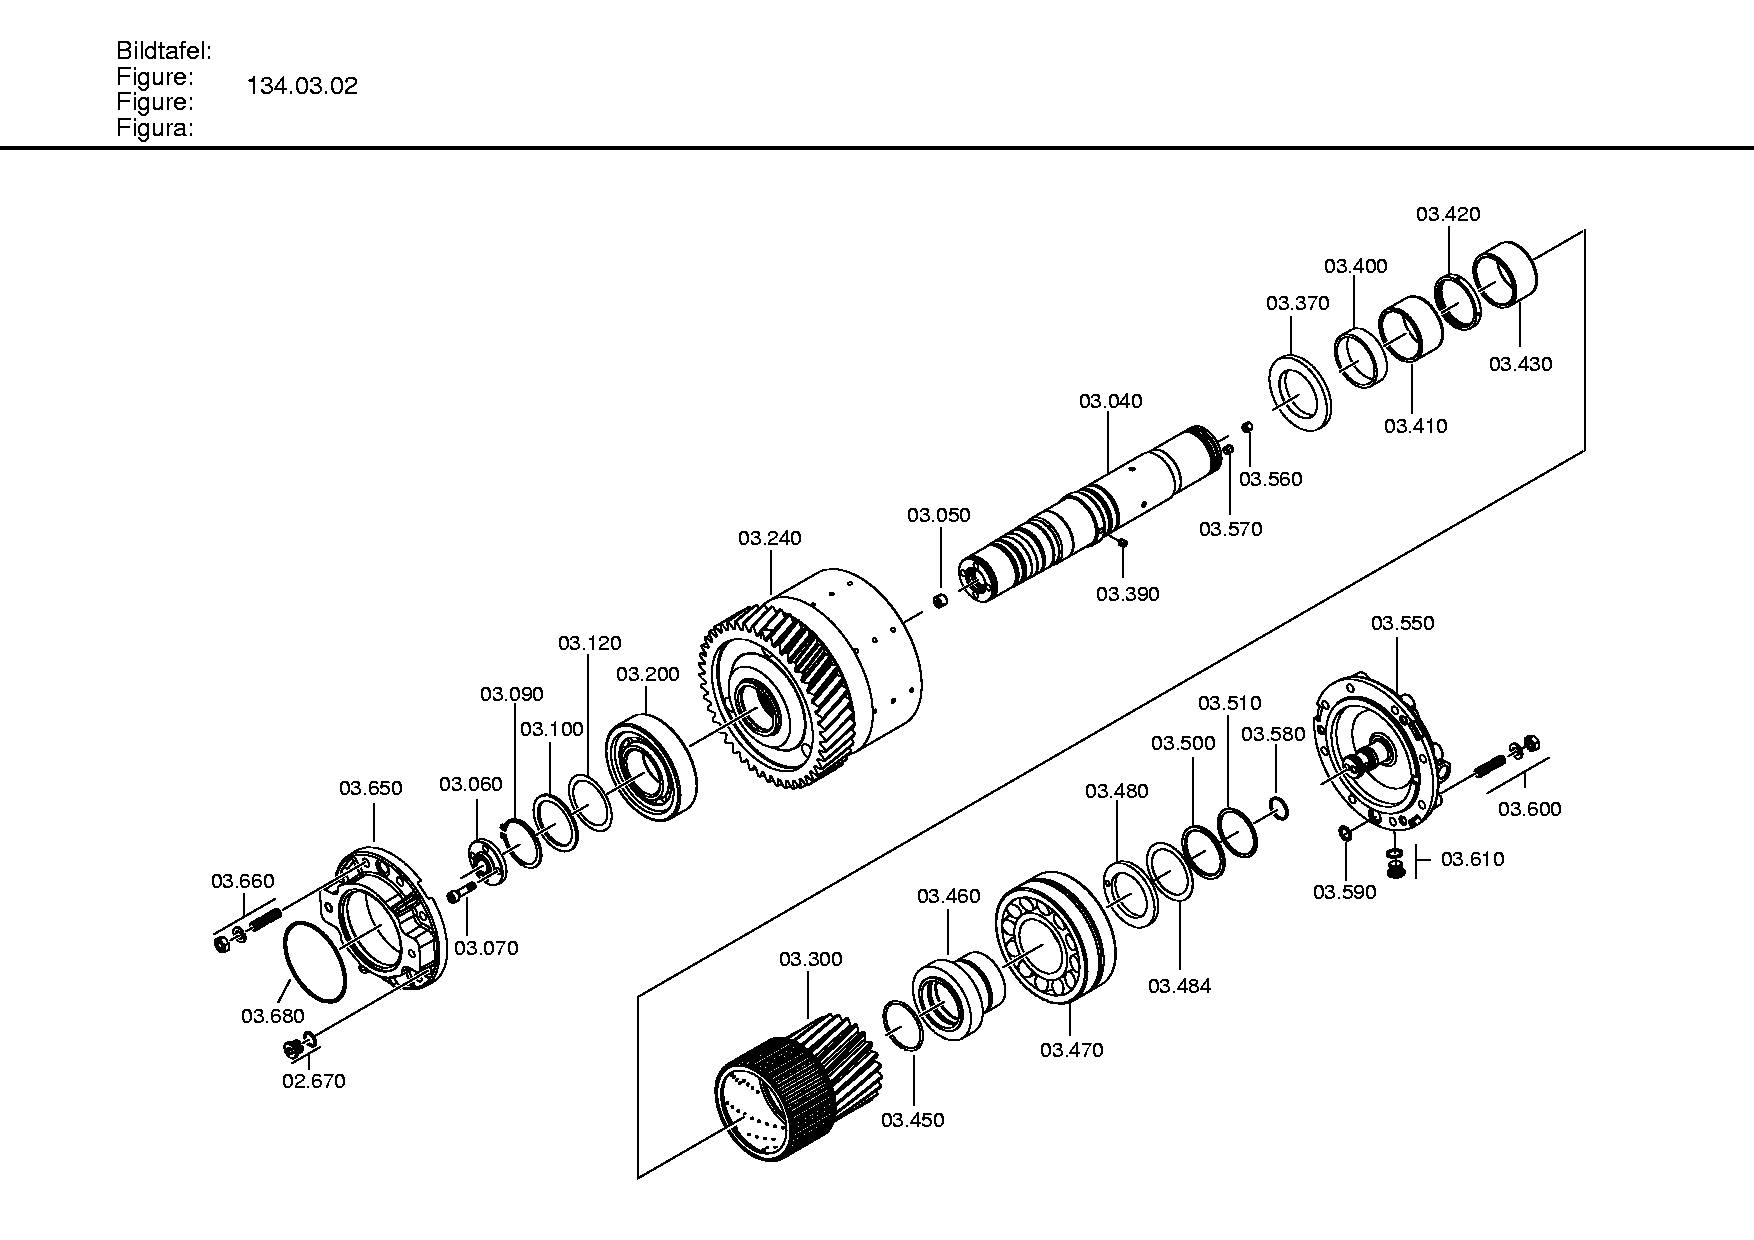 drawing for TEREX EQUIPMENT LIMITED 0012502 - CIRCLIP (figure 5)